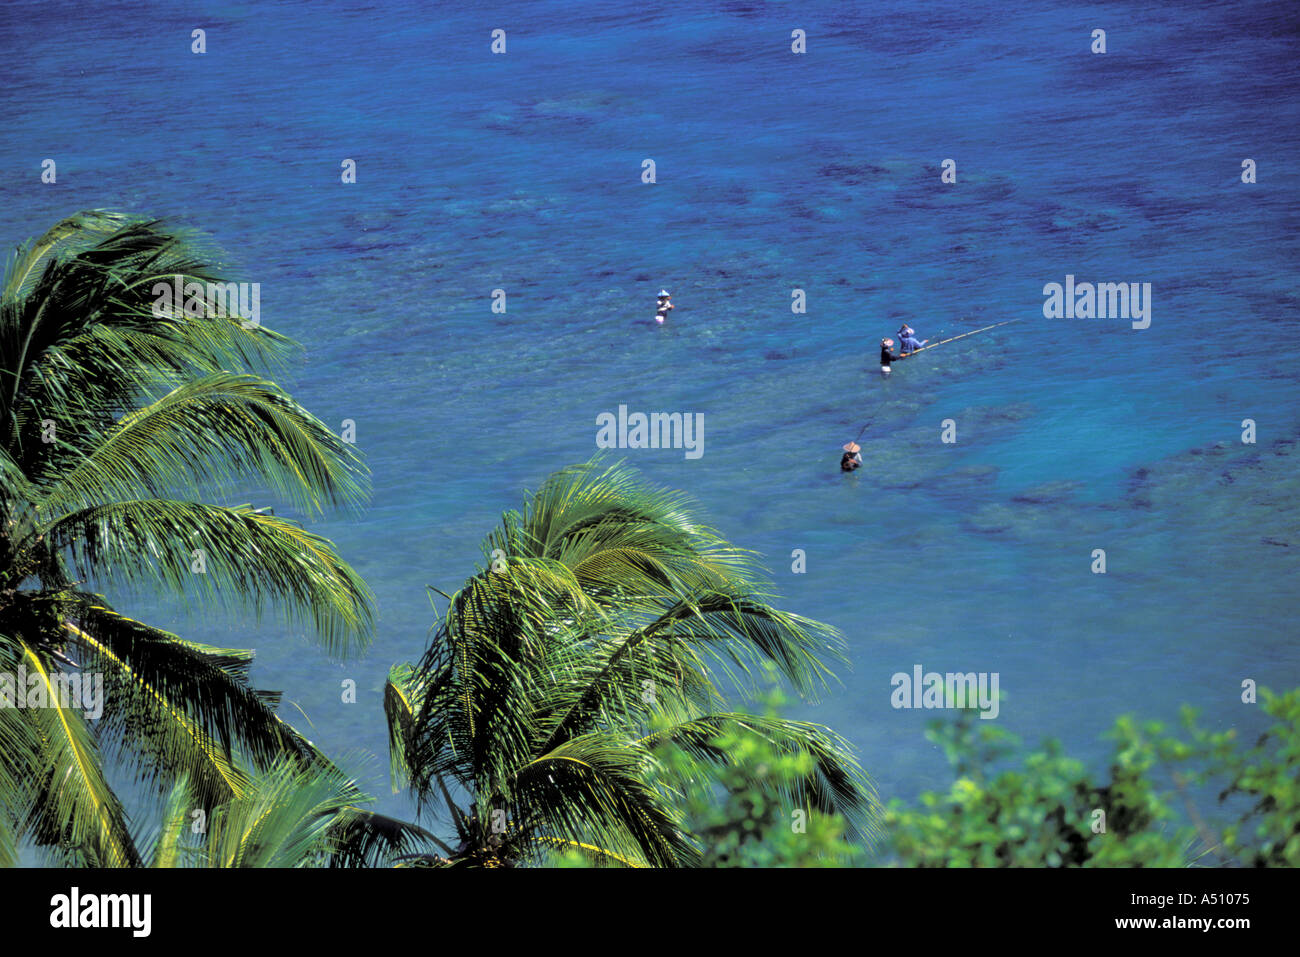 Overview of men fishing and coconut trees on the island of Lombok in eastern Indonesia Southeast Asia Stock Photo